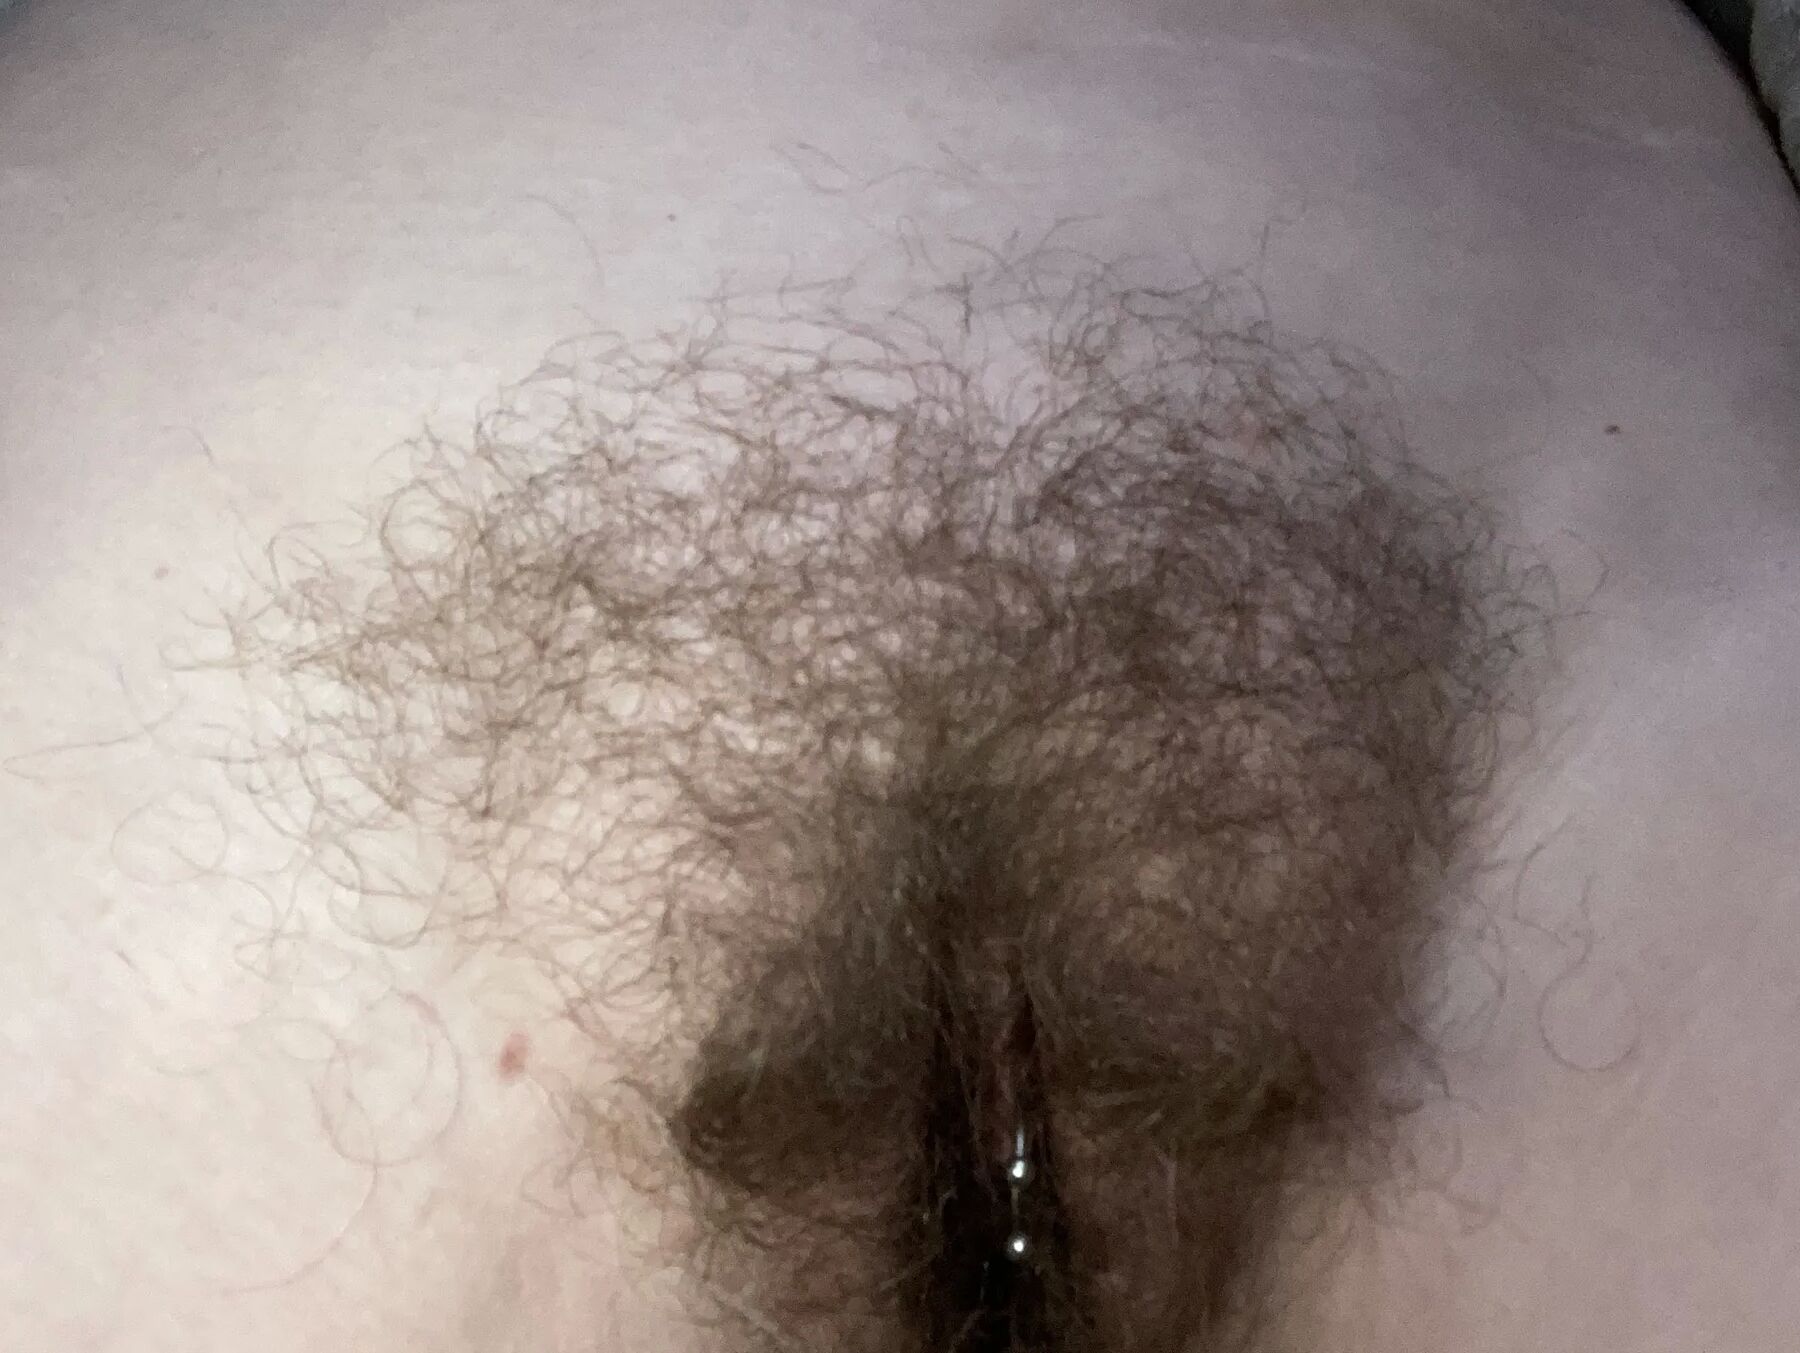 Styling my pubes